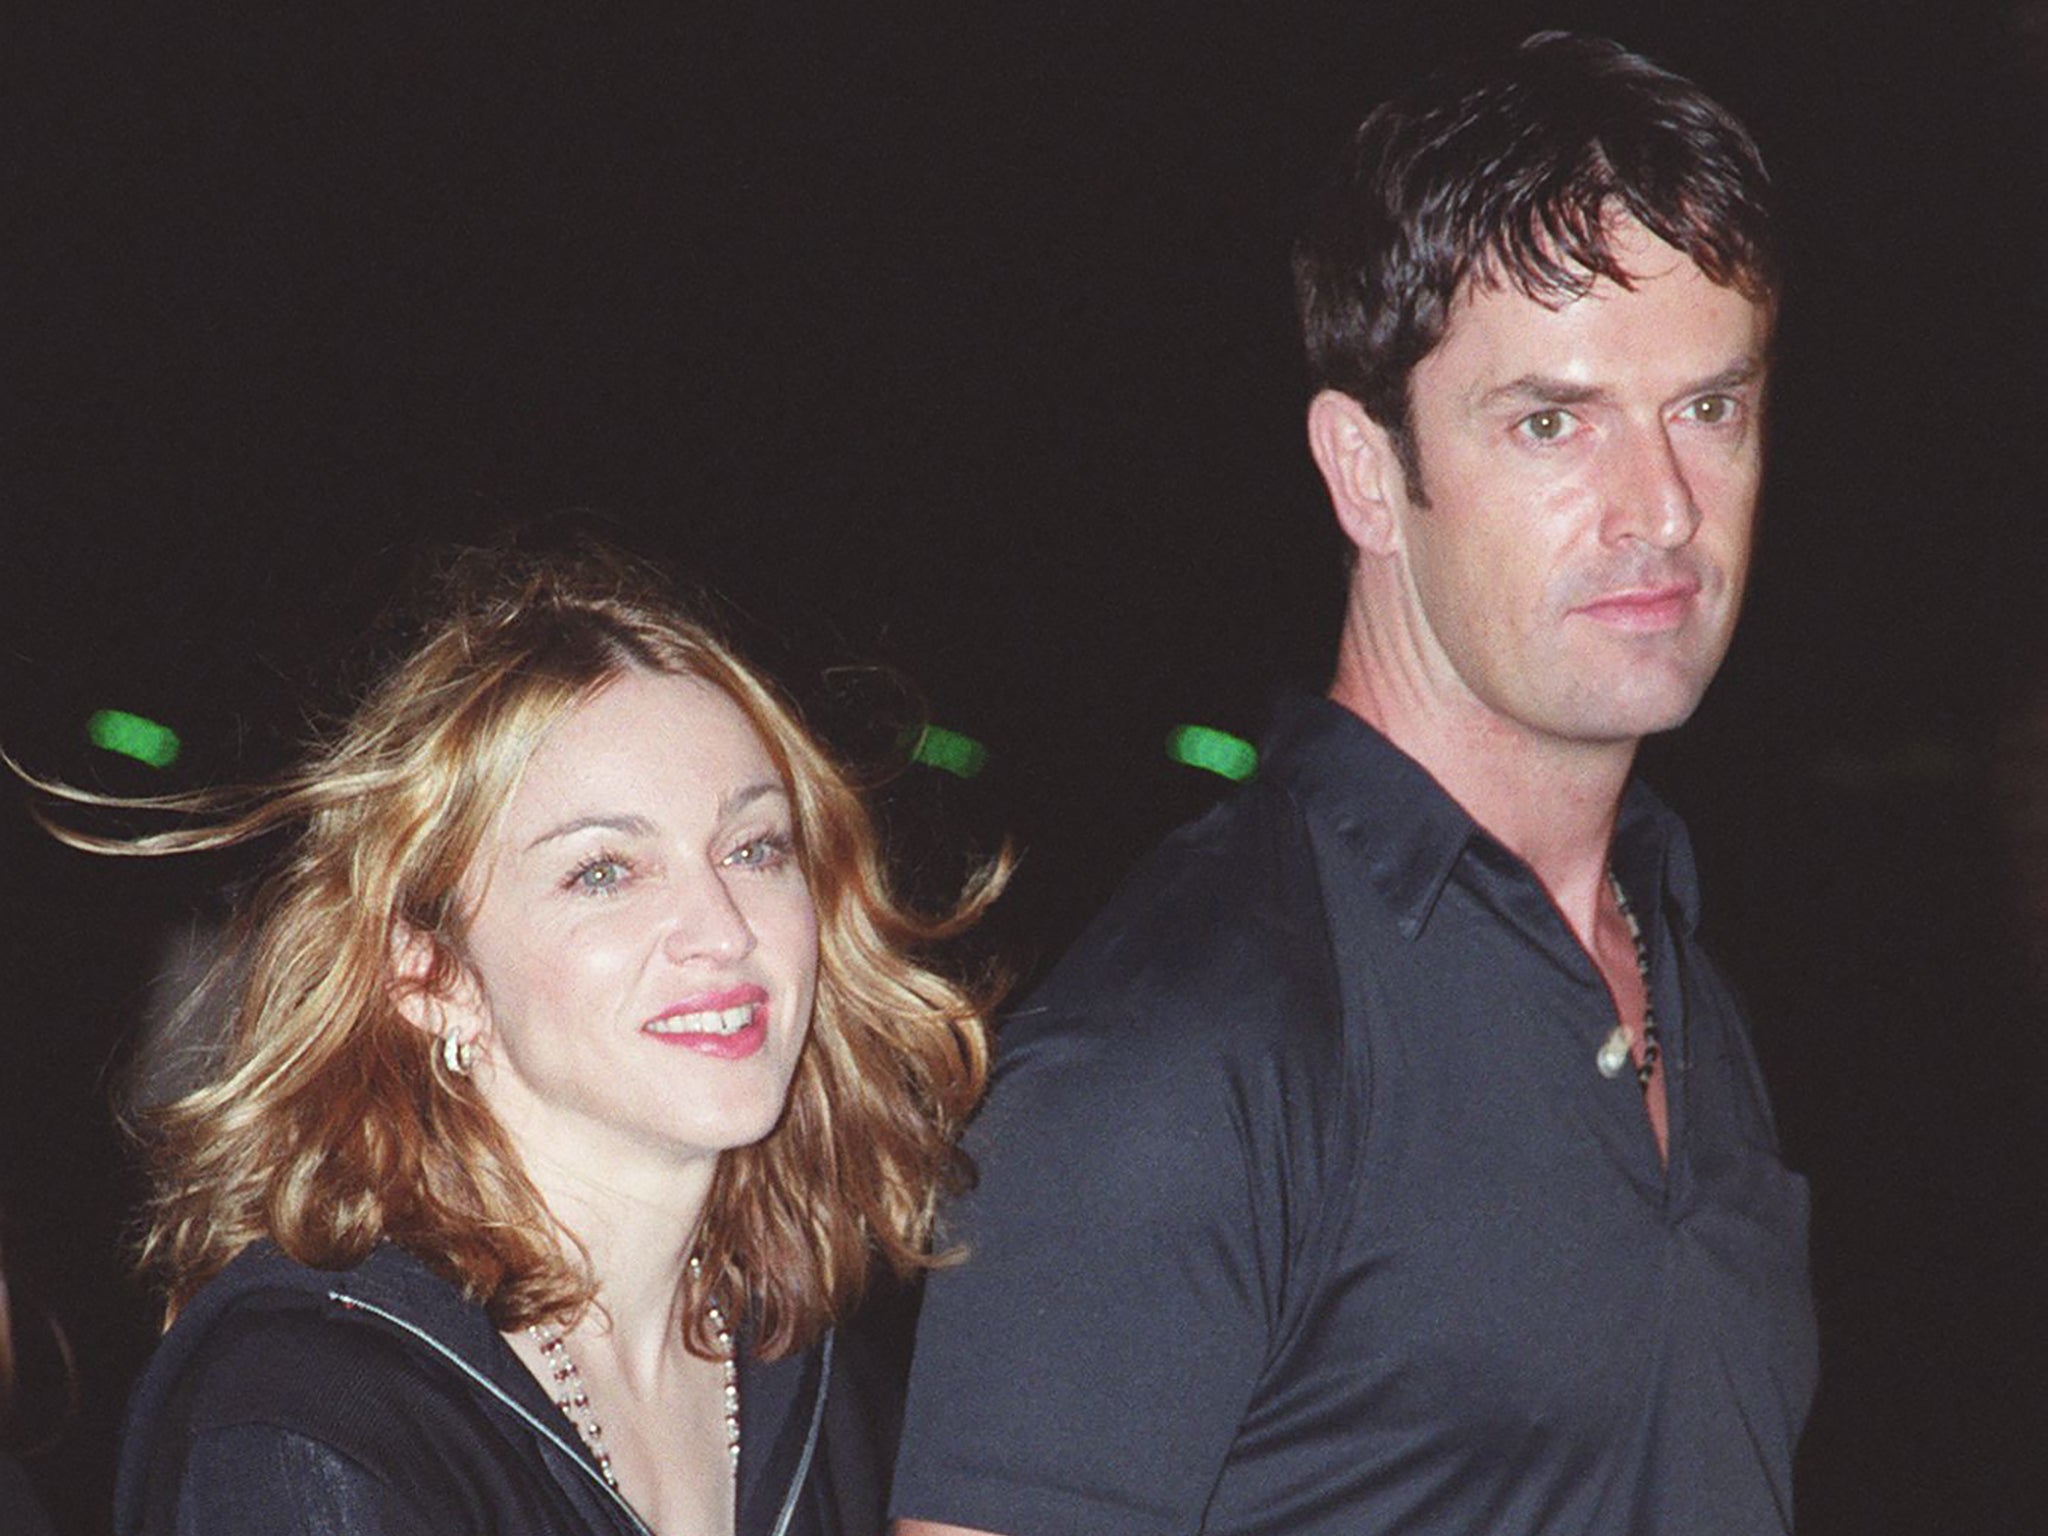 Rupert Everett with some sweaty barmaid (allegedly) at an event in 1999